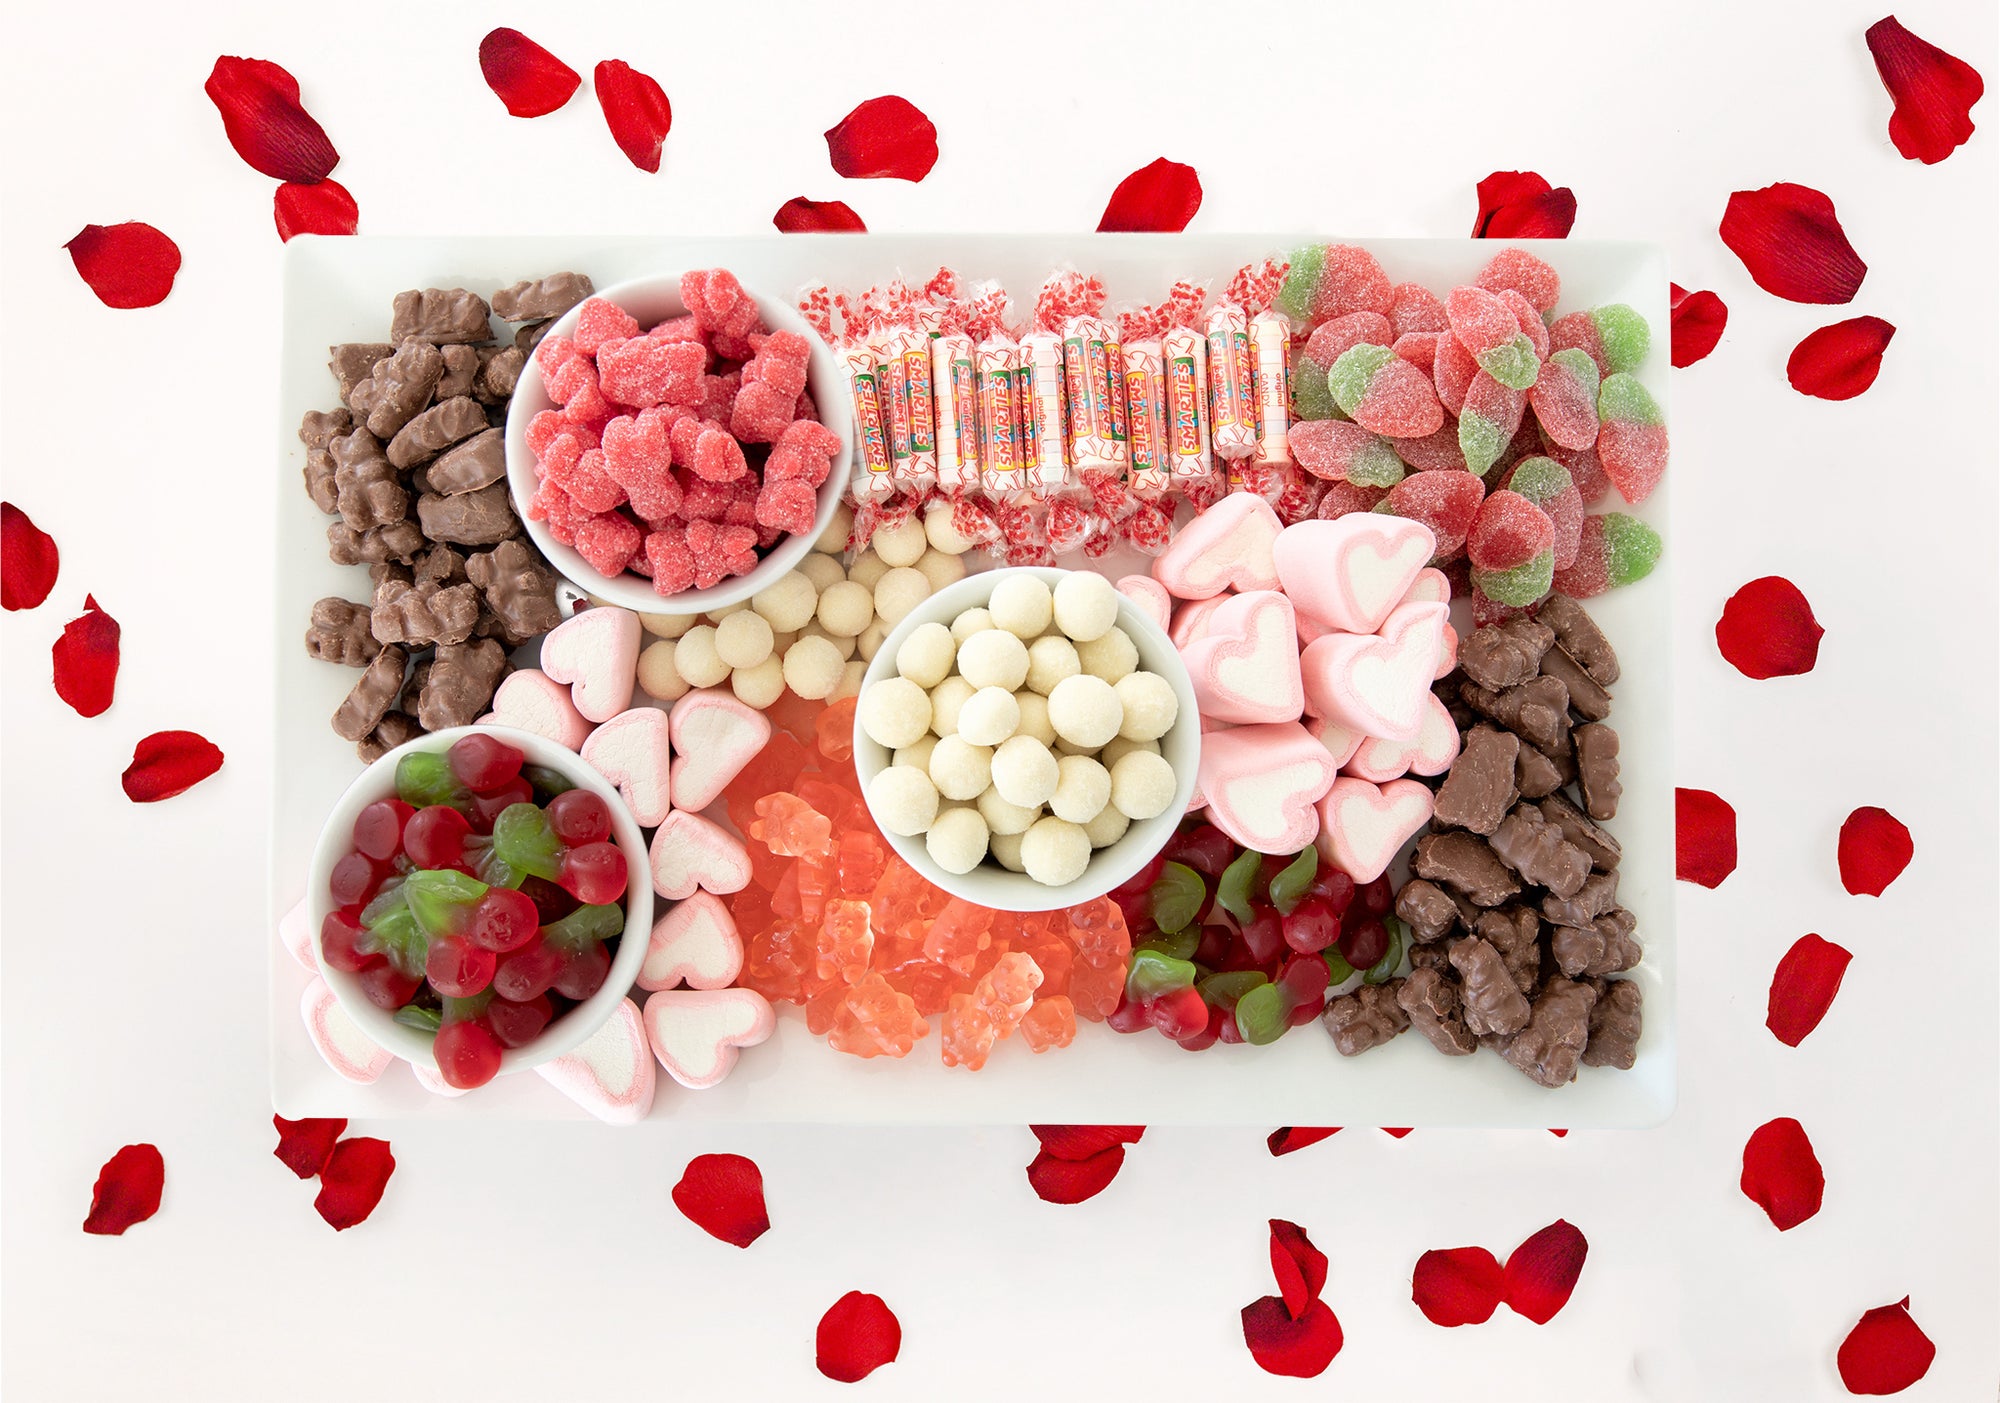 Sweet Love: The Bachelorette and Lolli & Pops Candy Charcuterie Kit Collaboration